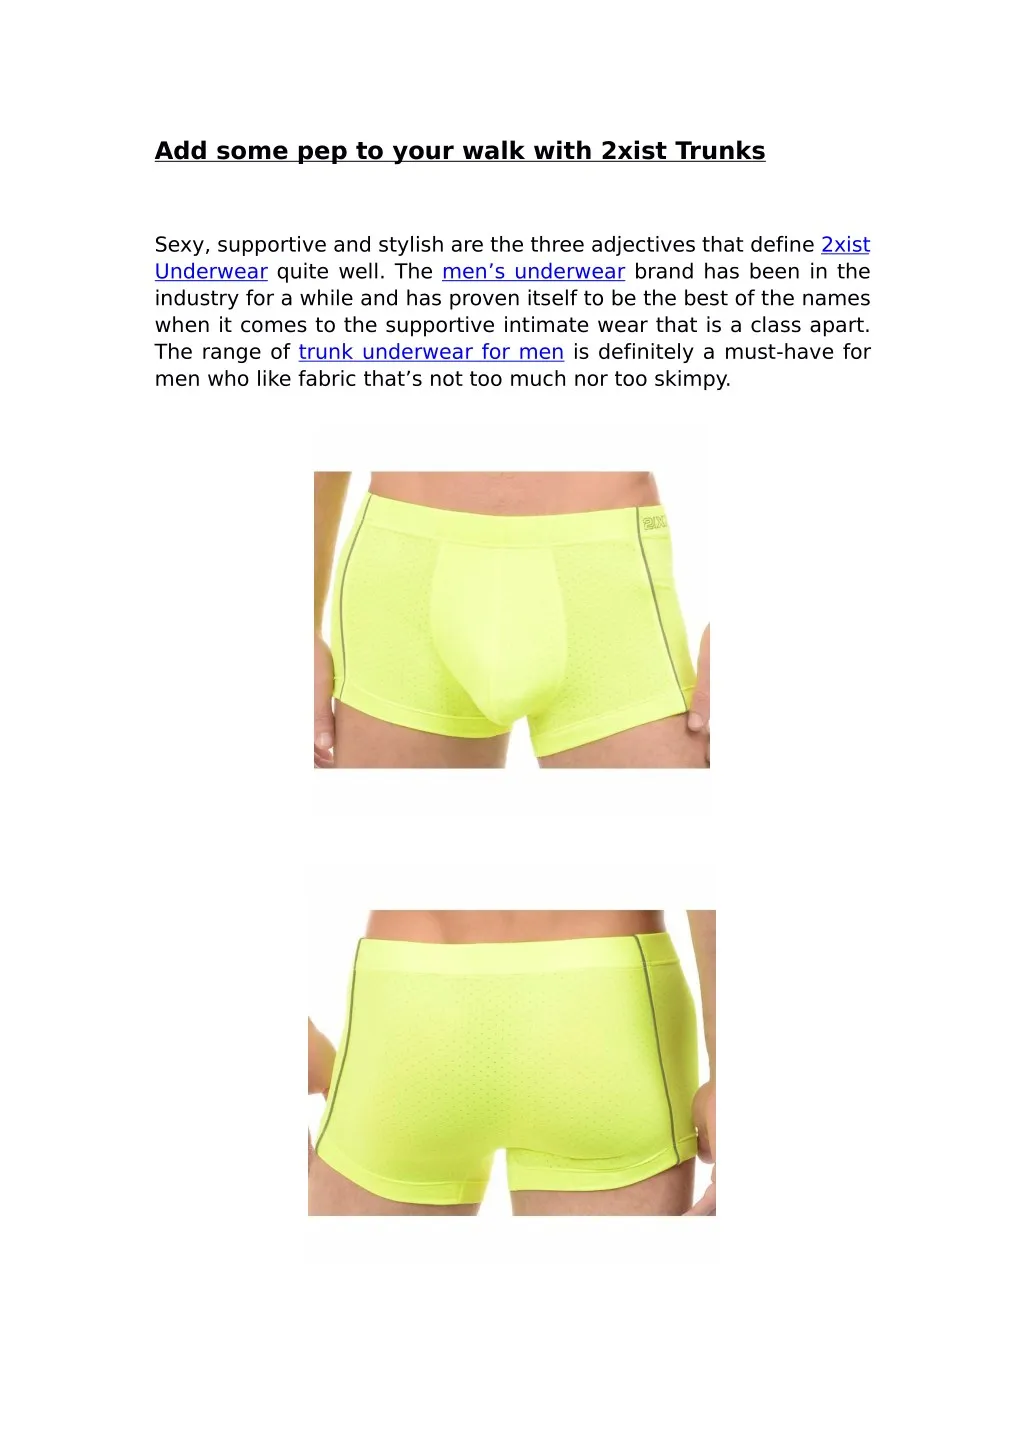 add some pep to your walk with 2xist trunks